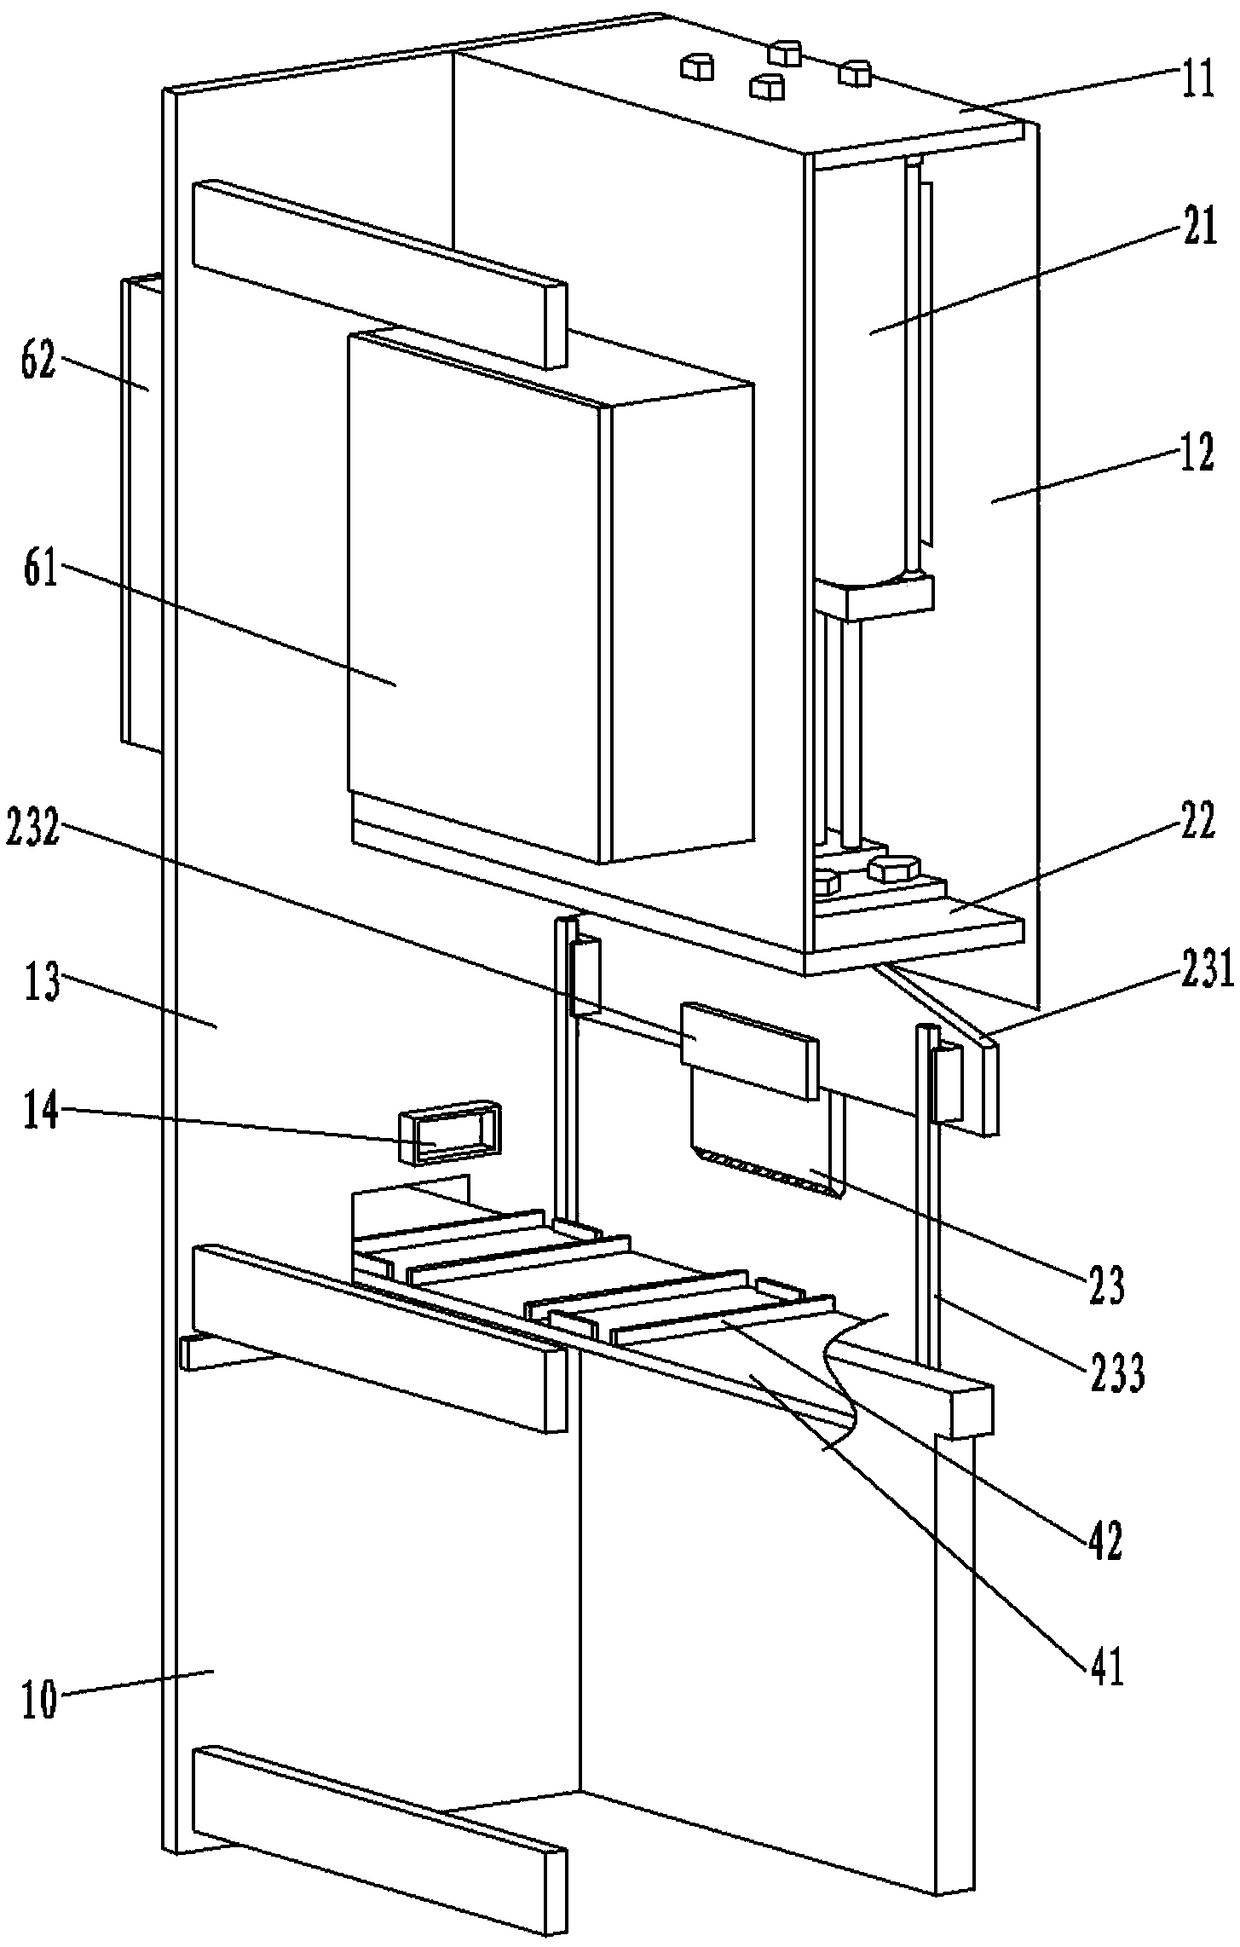 An automatic packaging machine for clothing packaging boxes